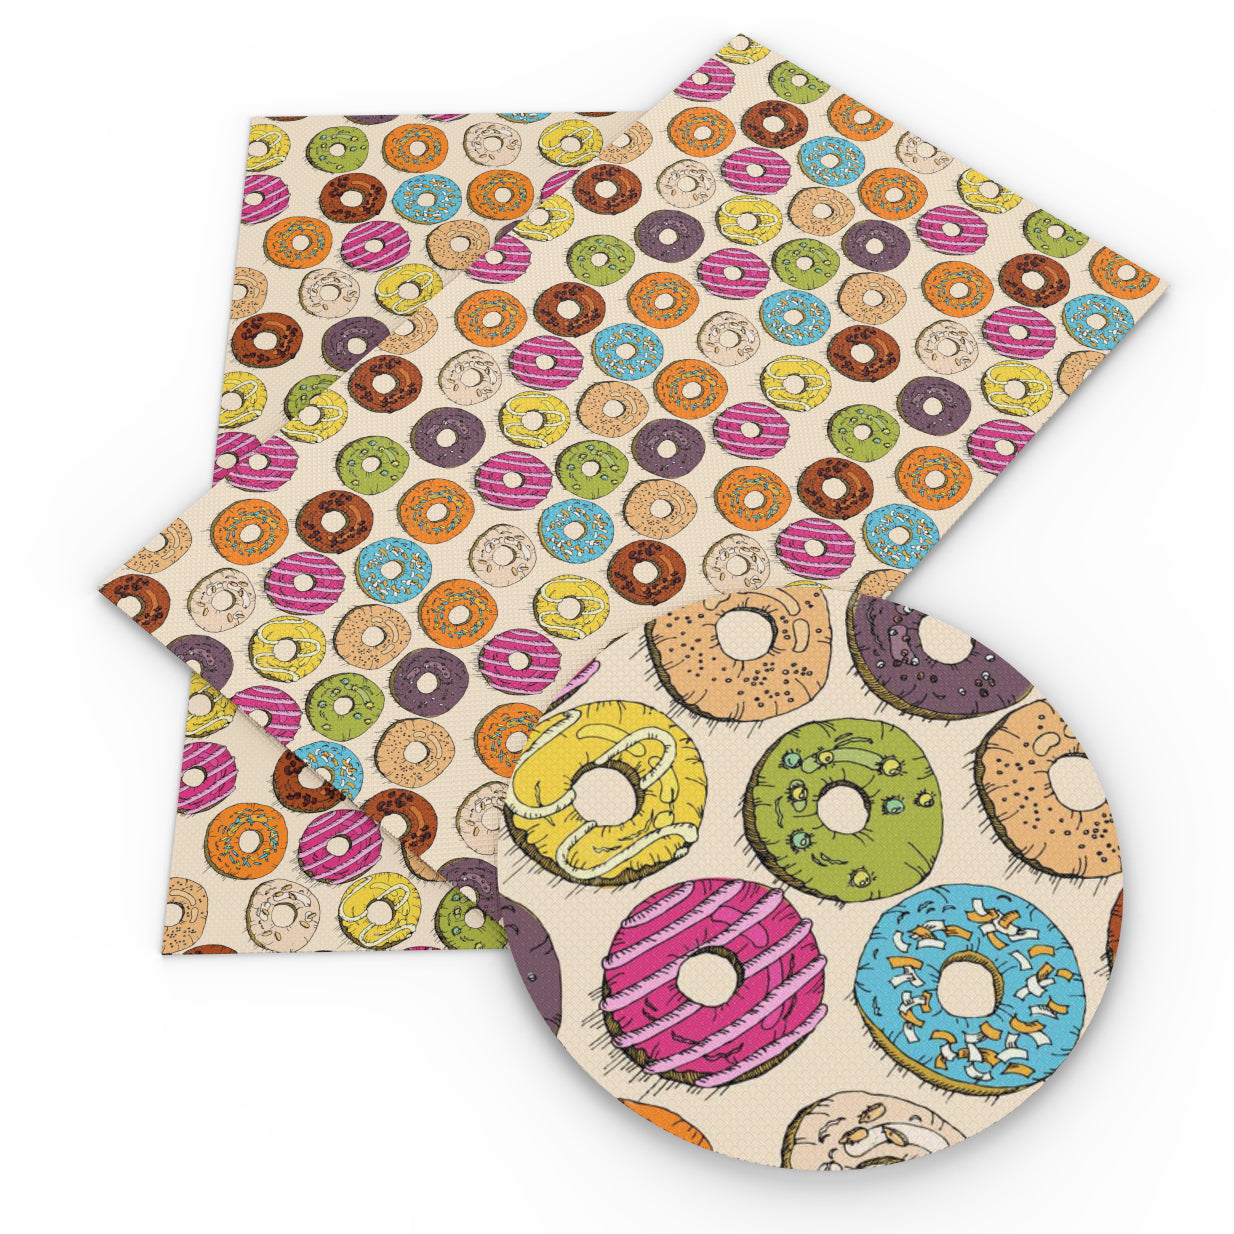 Donut Printed Faux Leather Sheets Wholesale